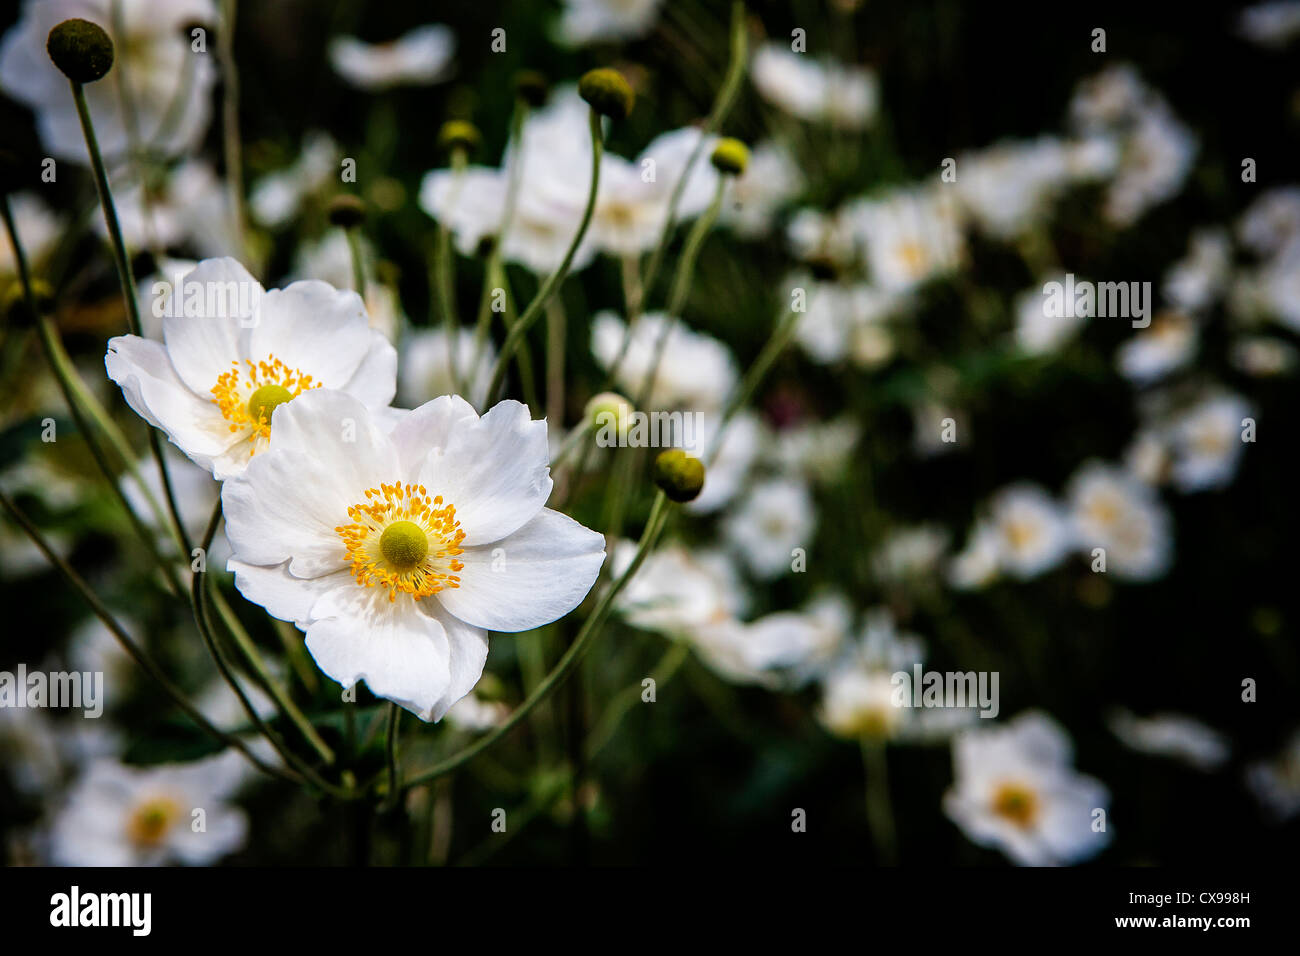 White Japanese Anemone flowers with a multitude of others out of focus behind them Stock Photo